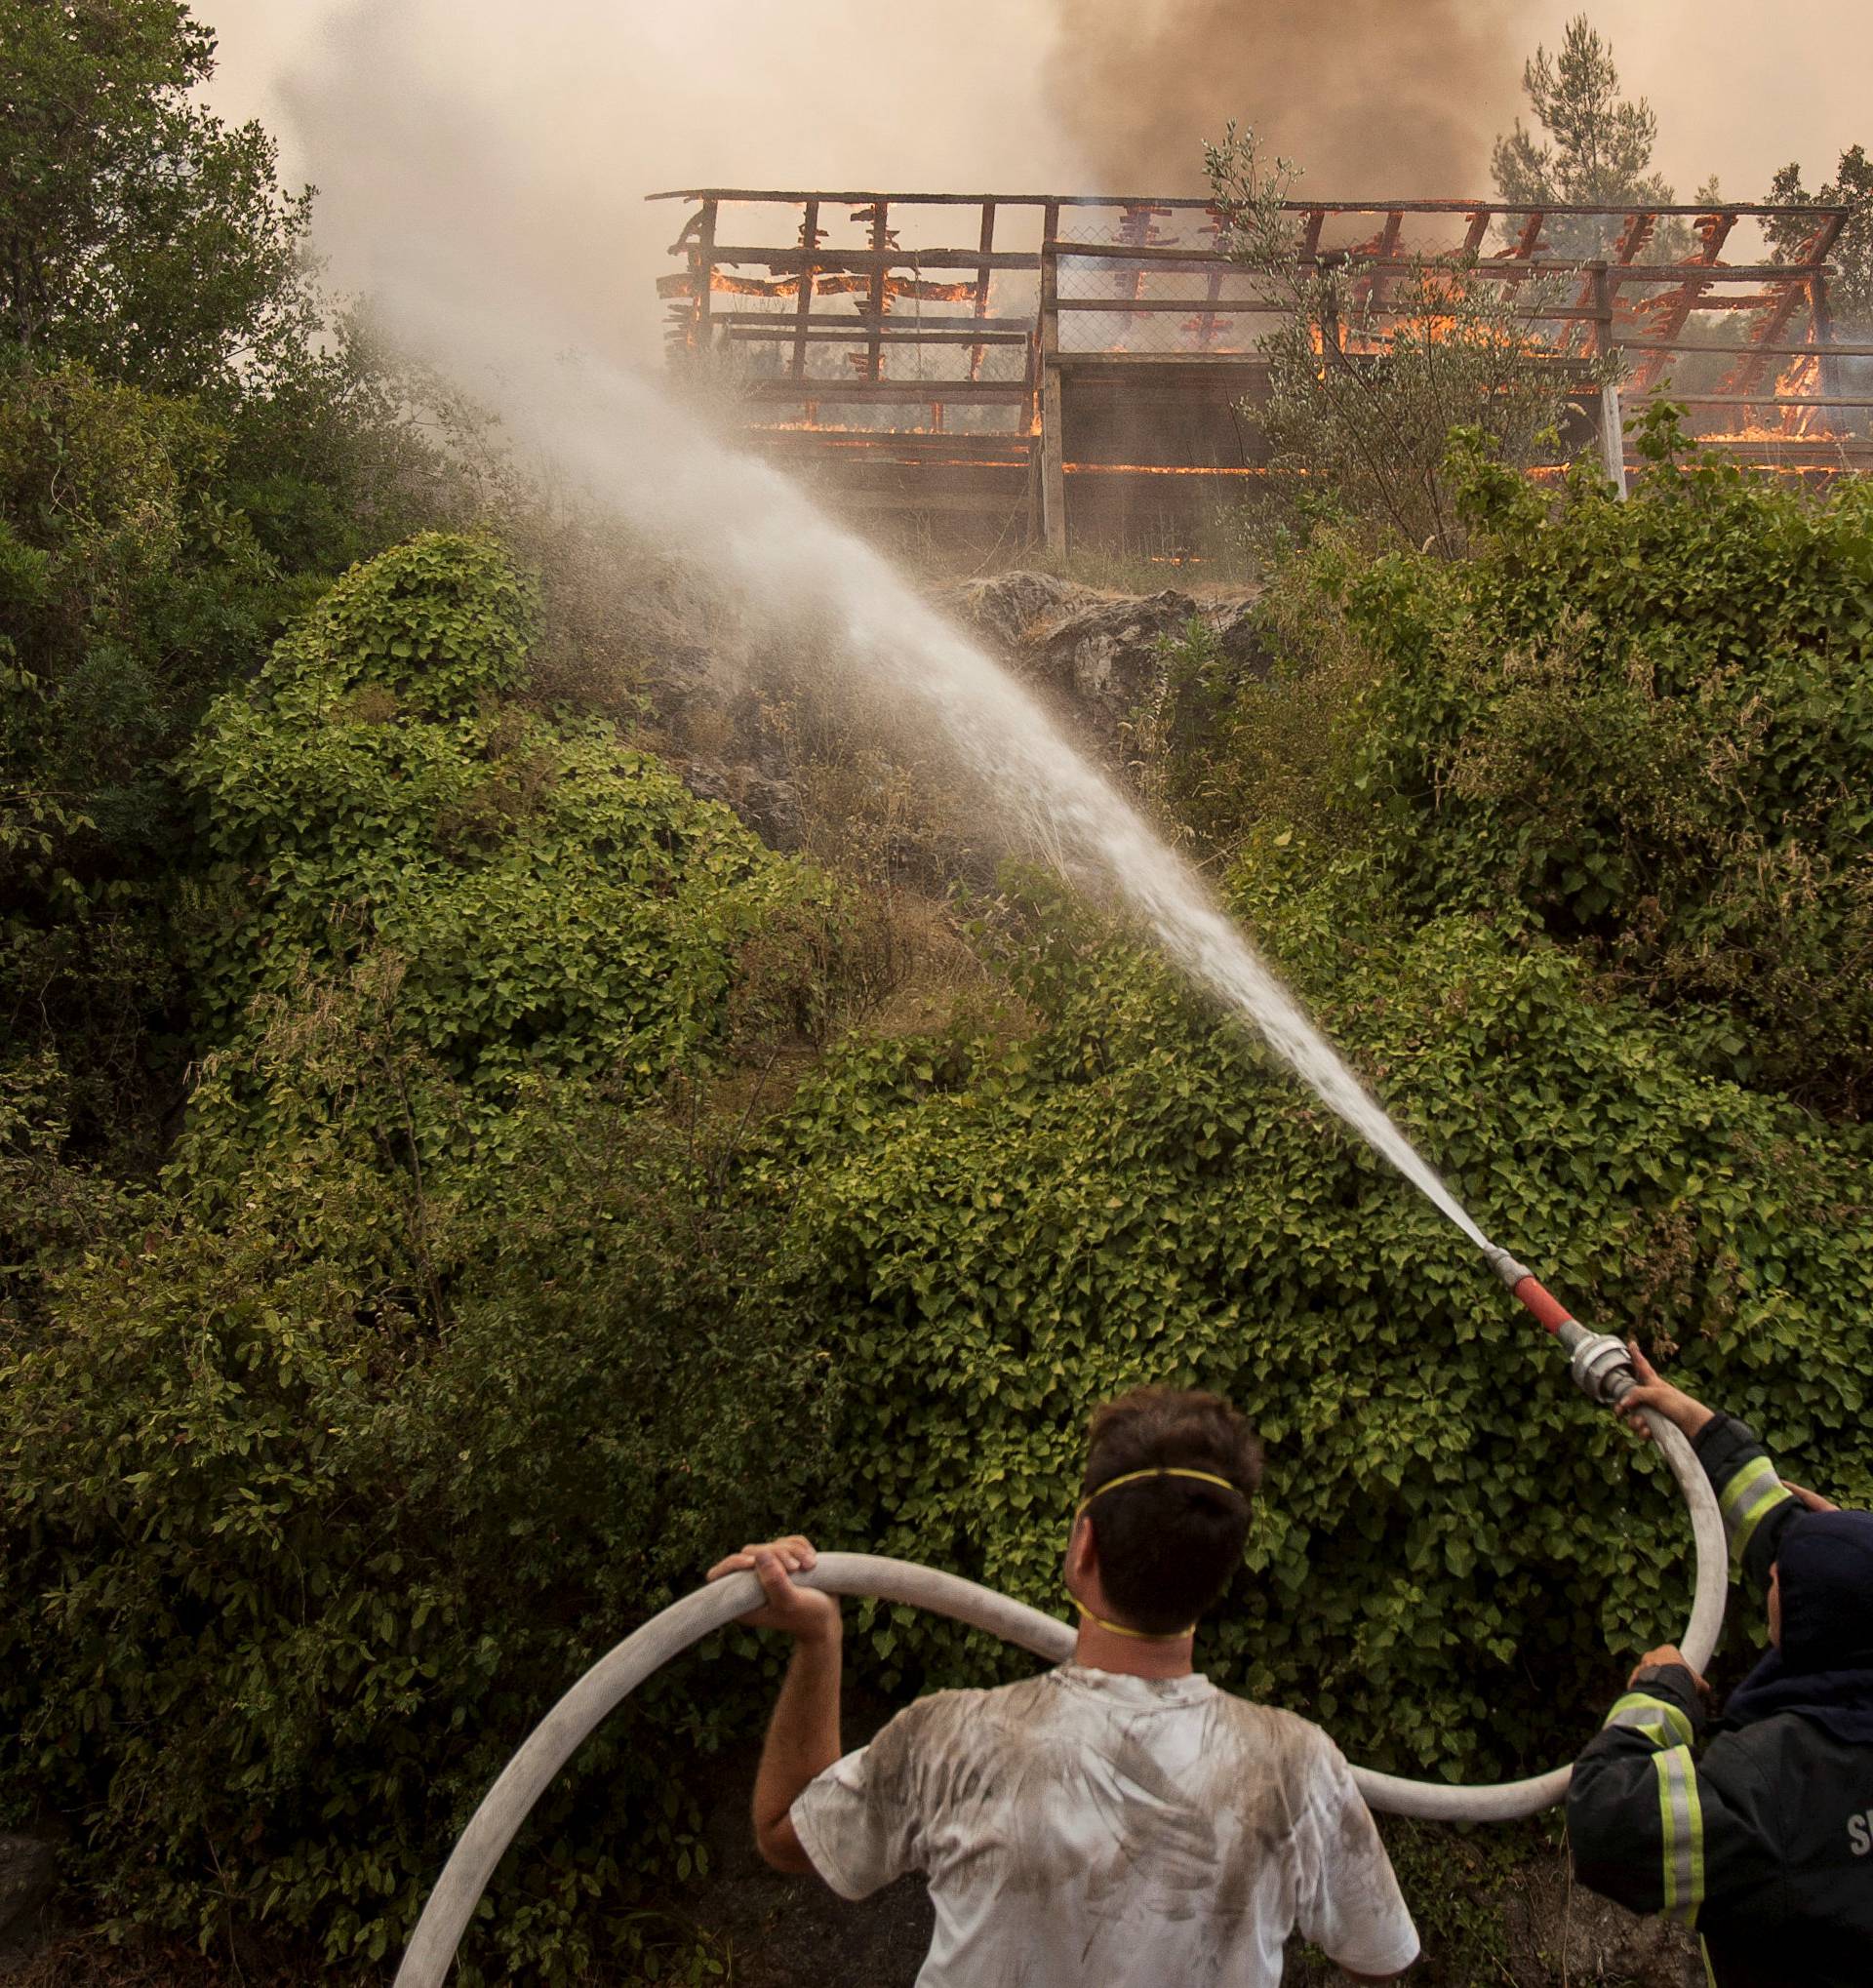 Firefighters try to control flames around a burning cabin during a forest fire at Lustica peninsula near Tivat